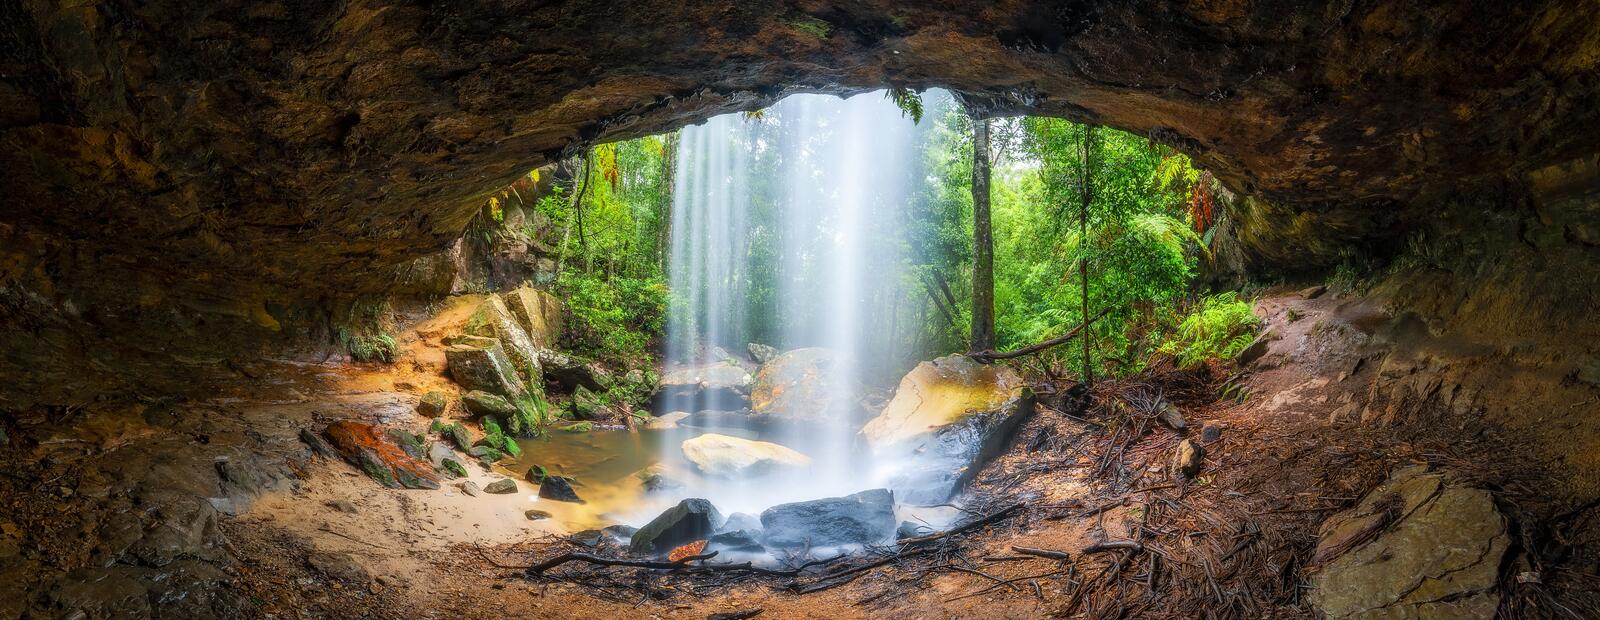 Wallpapers tropical forest Australia waterfall on the desktop